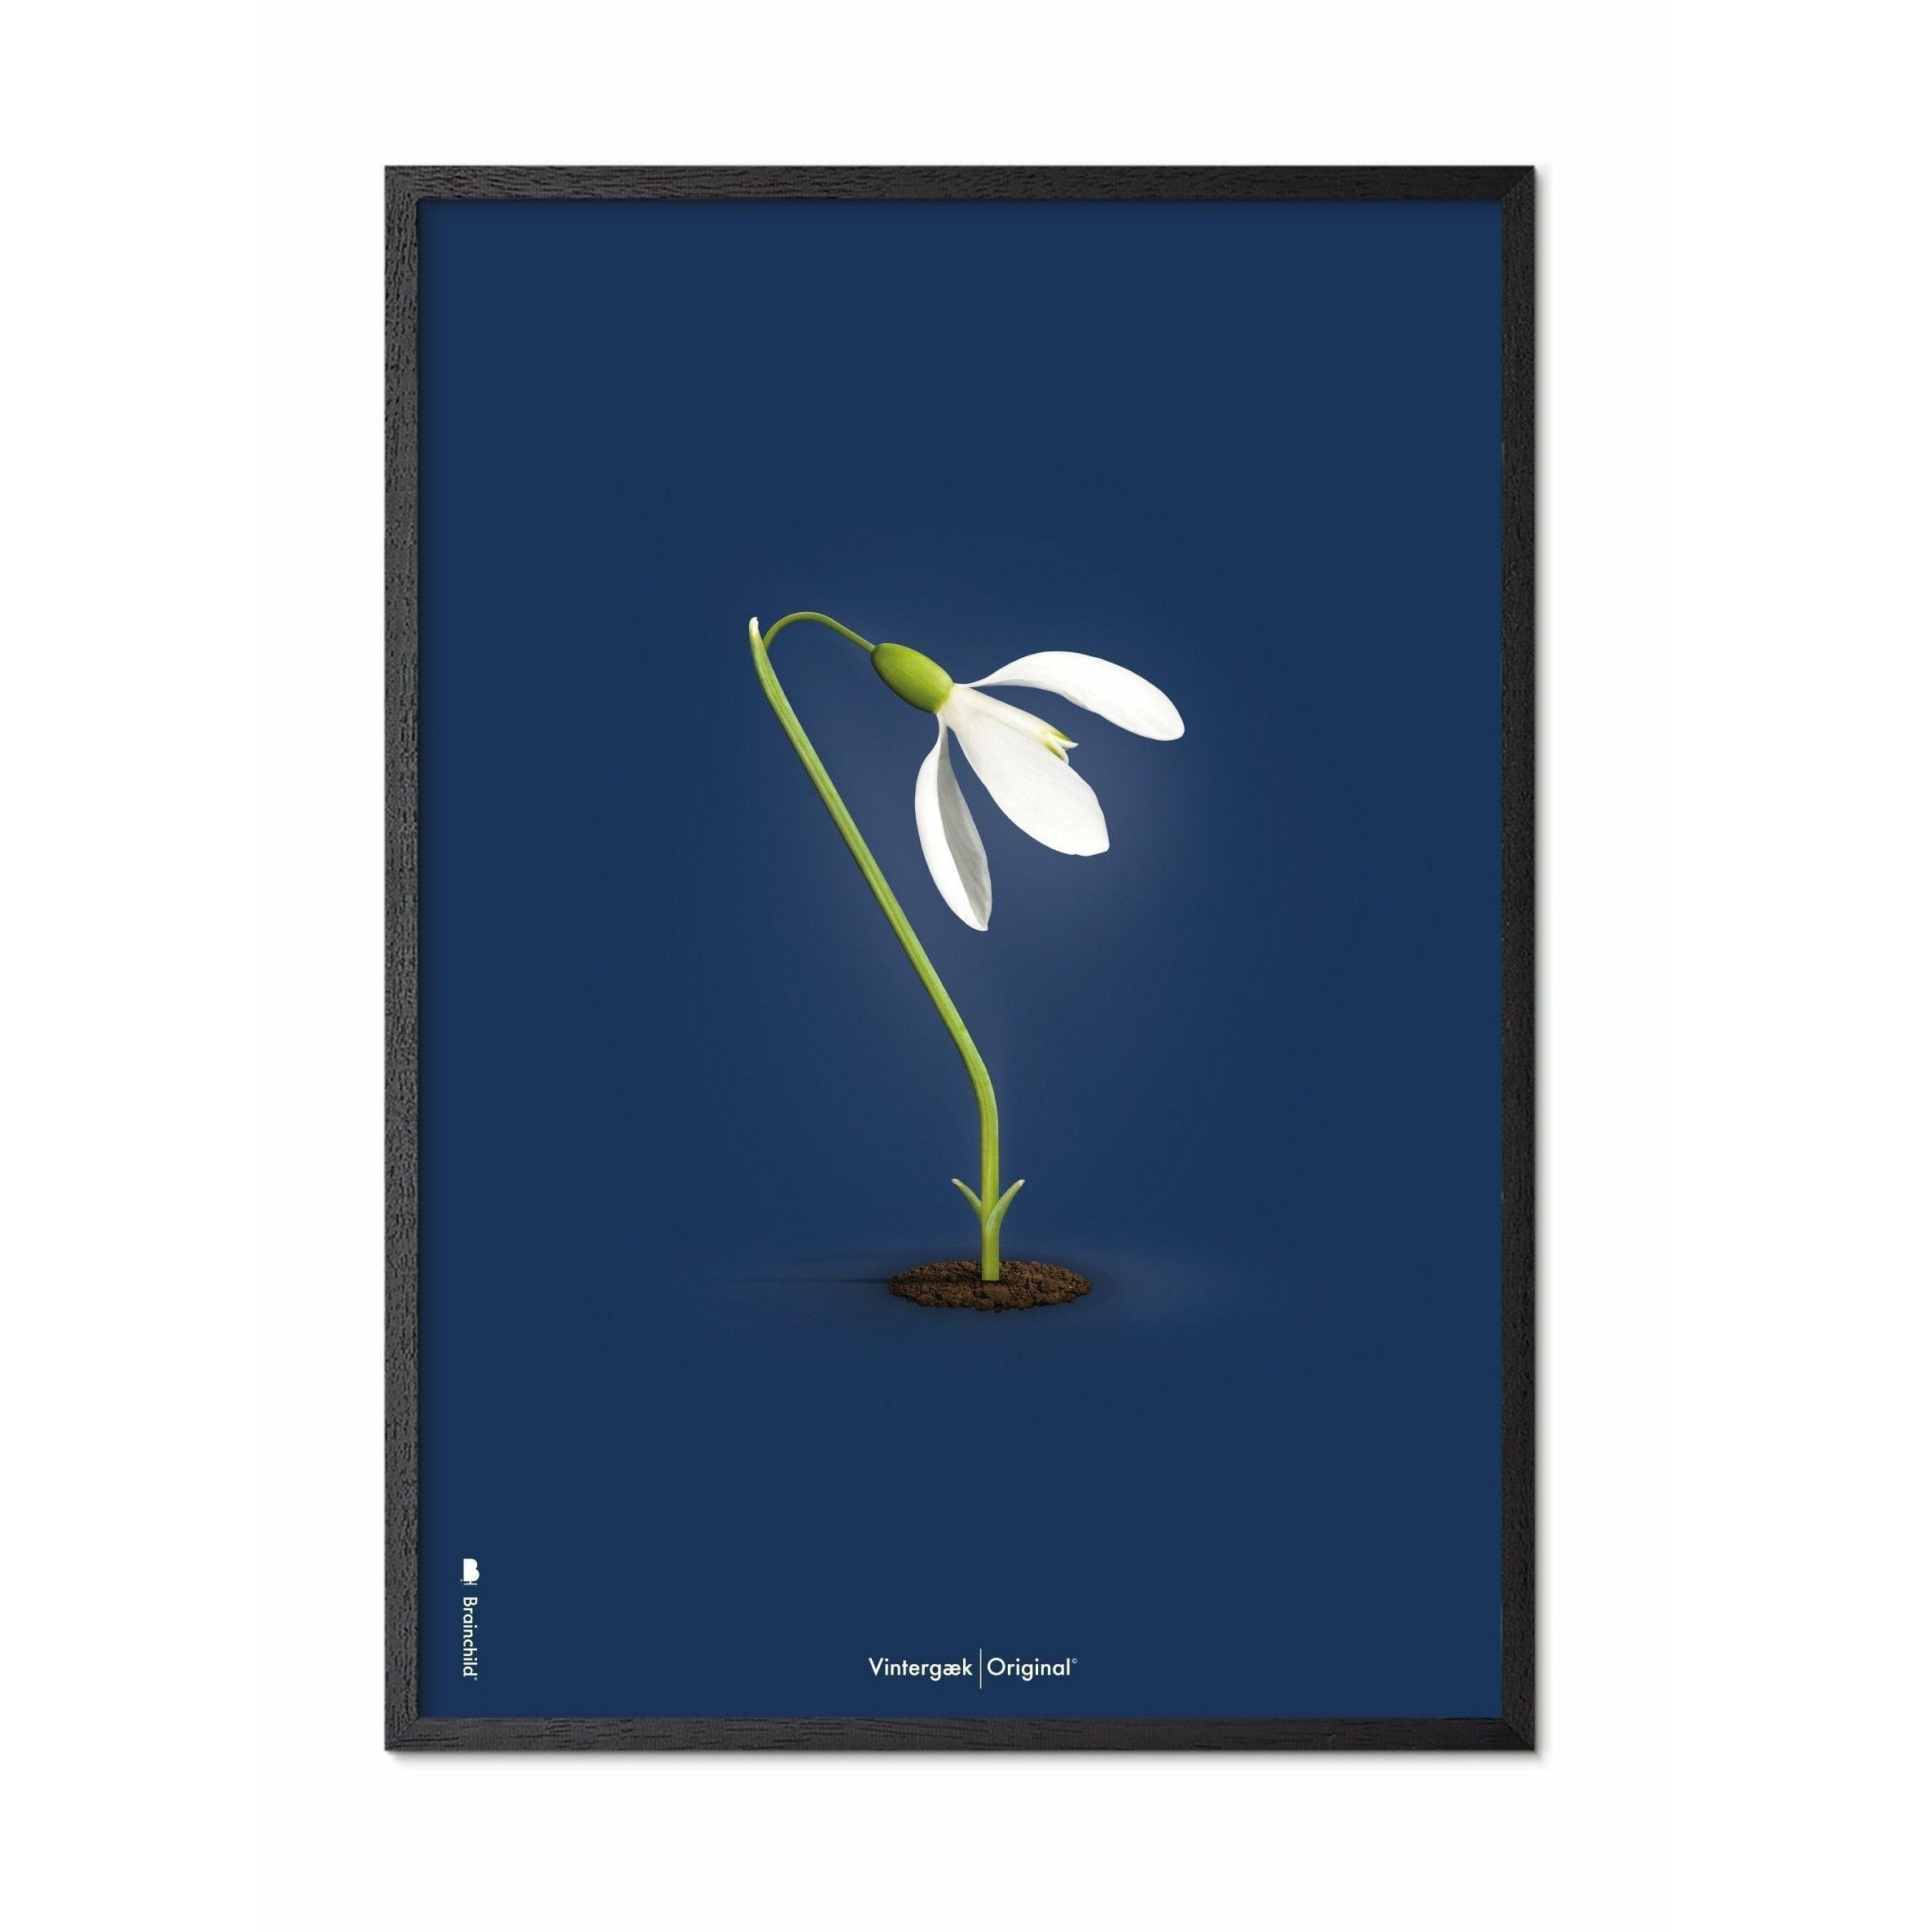 Brainchild Snowdrop Classic Poster, Frame In Black Lacquered Wood A5, Dark Blue Background